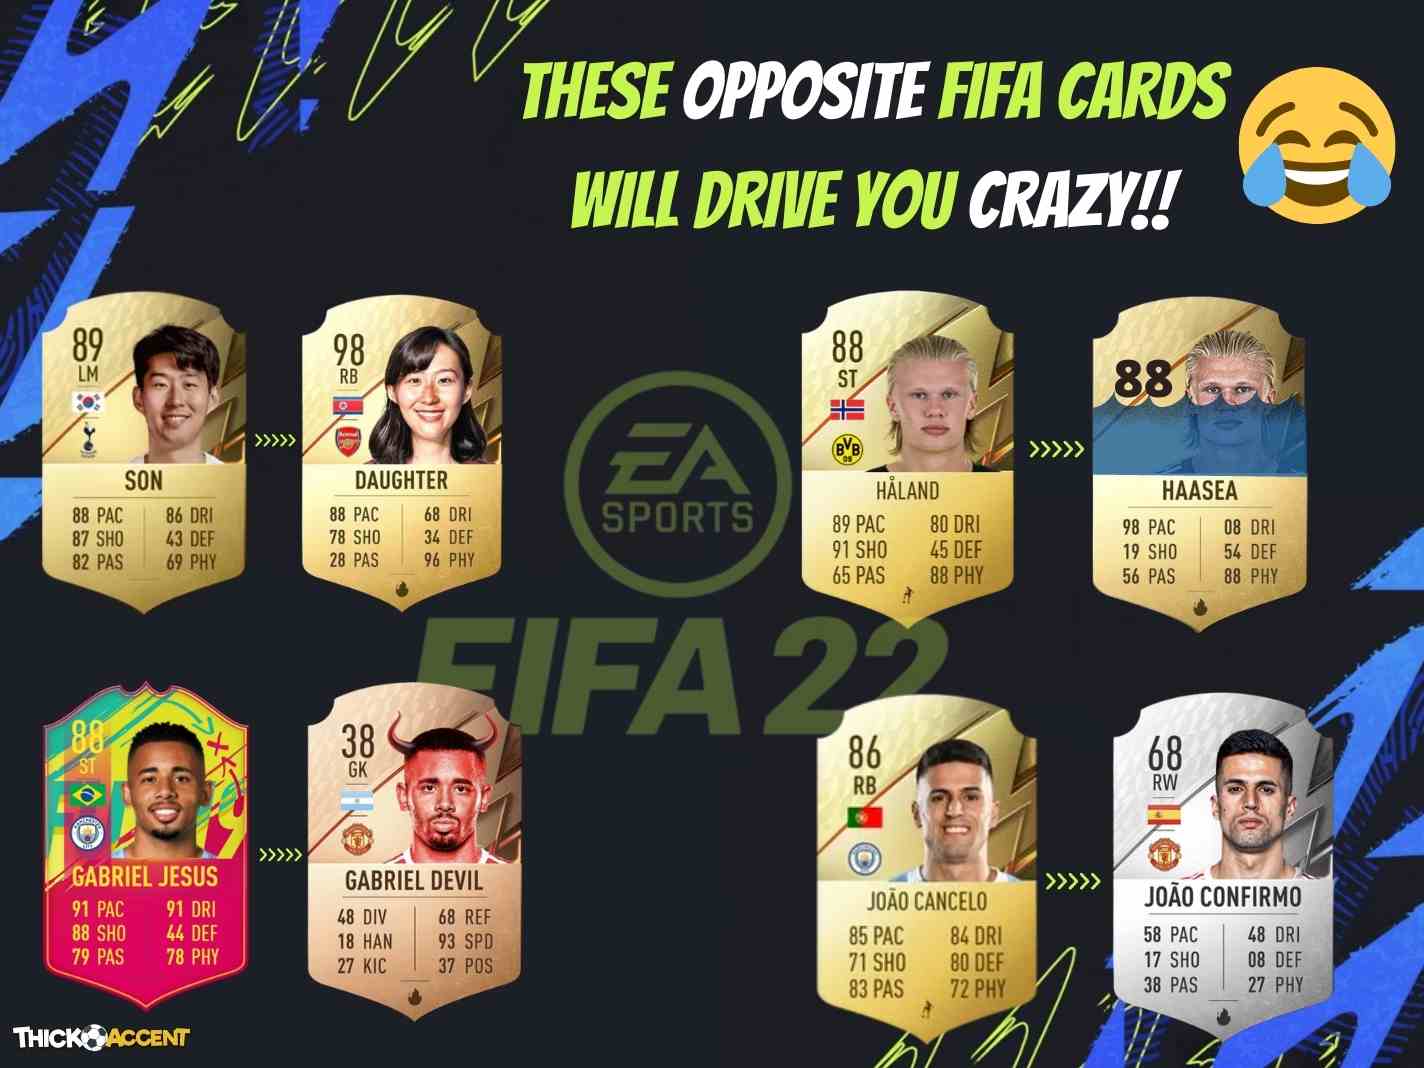 The slightly disturbing FIFA cards that turn footballers into their own opposite